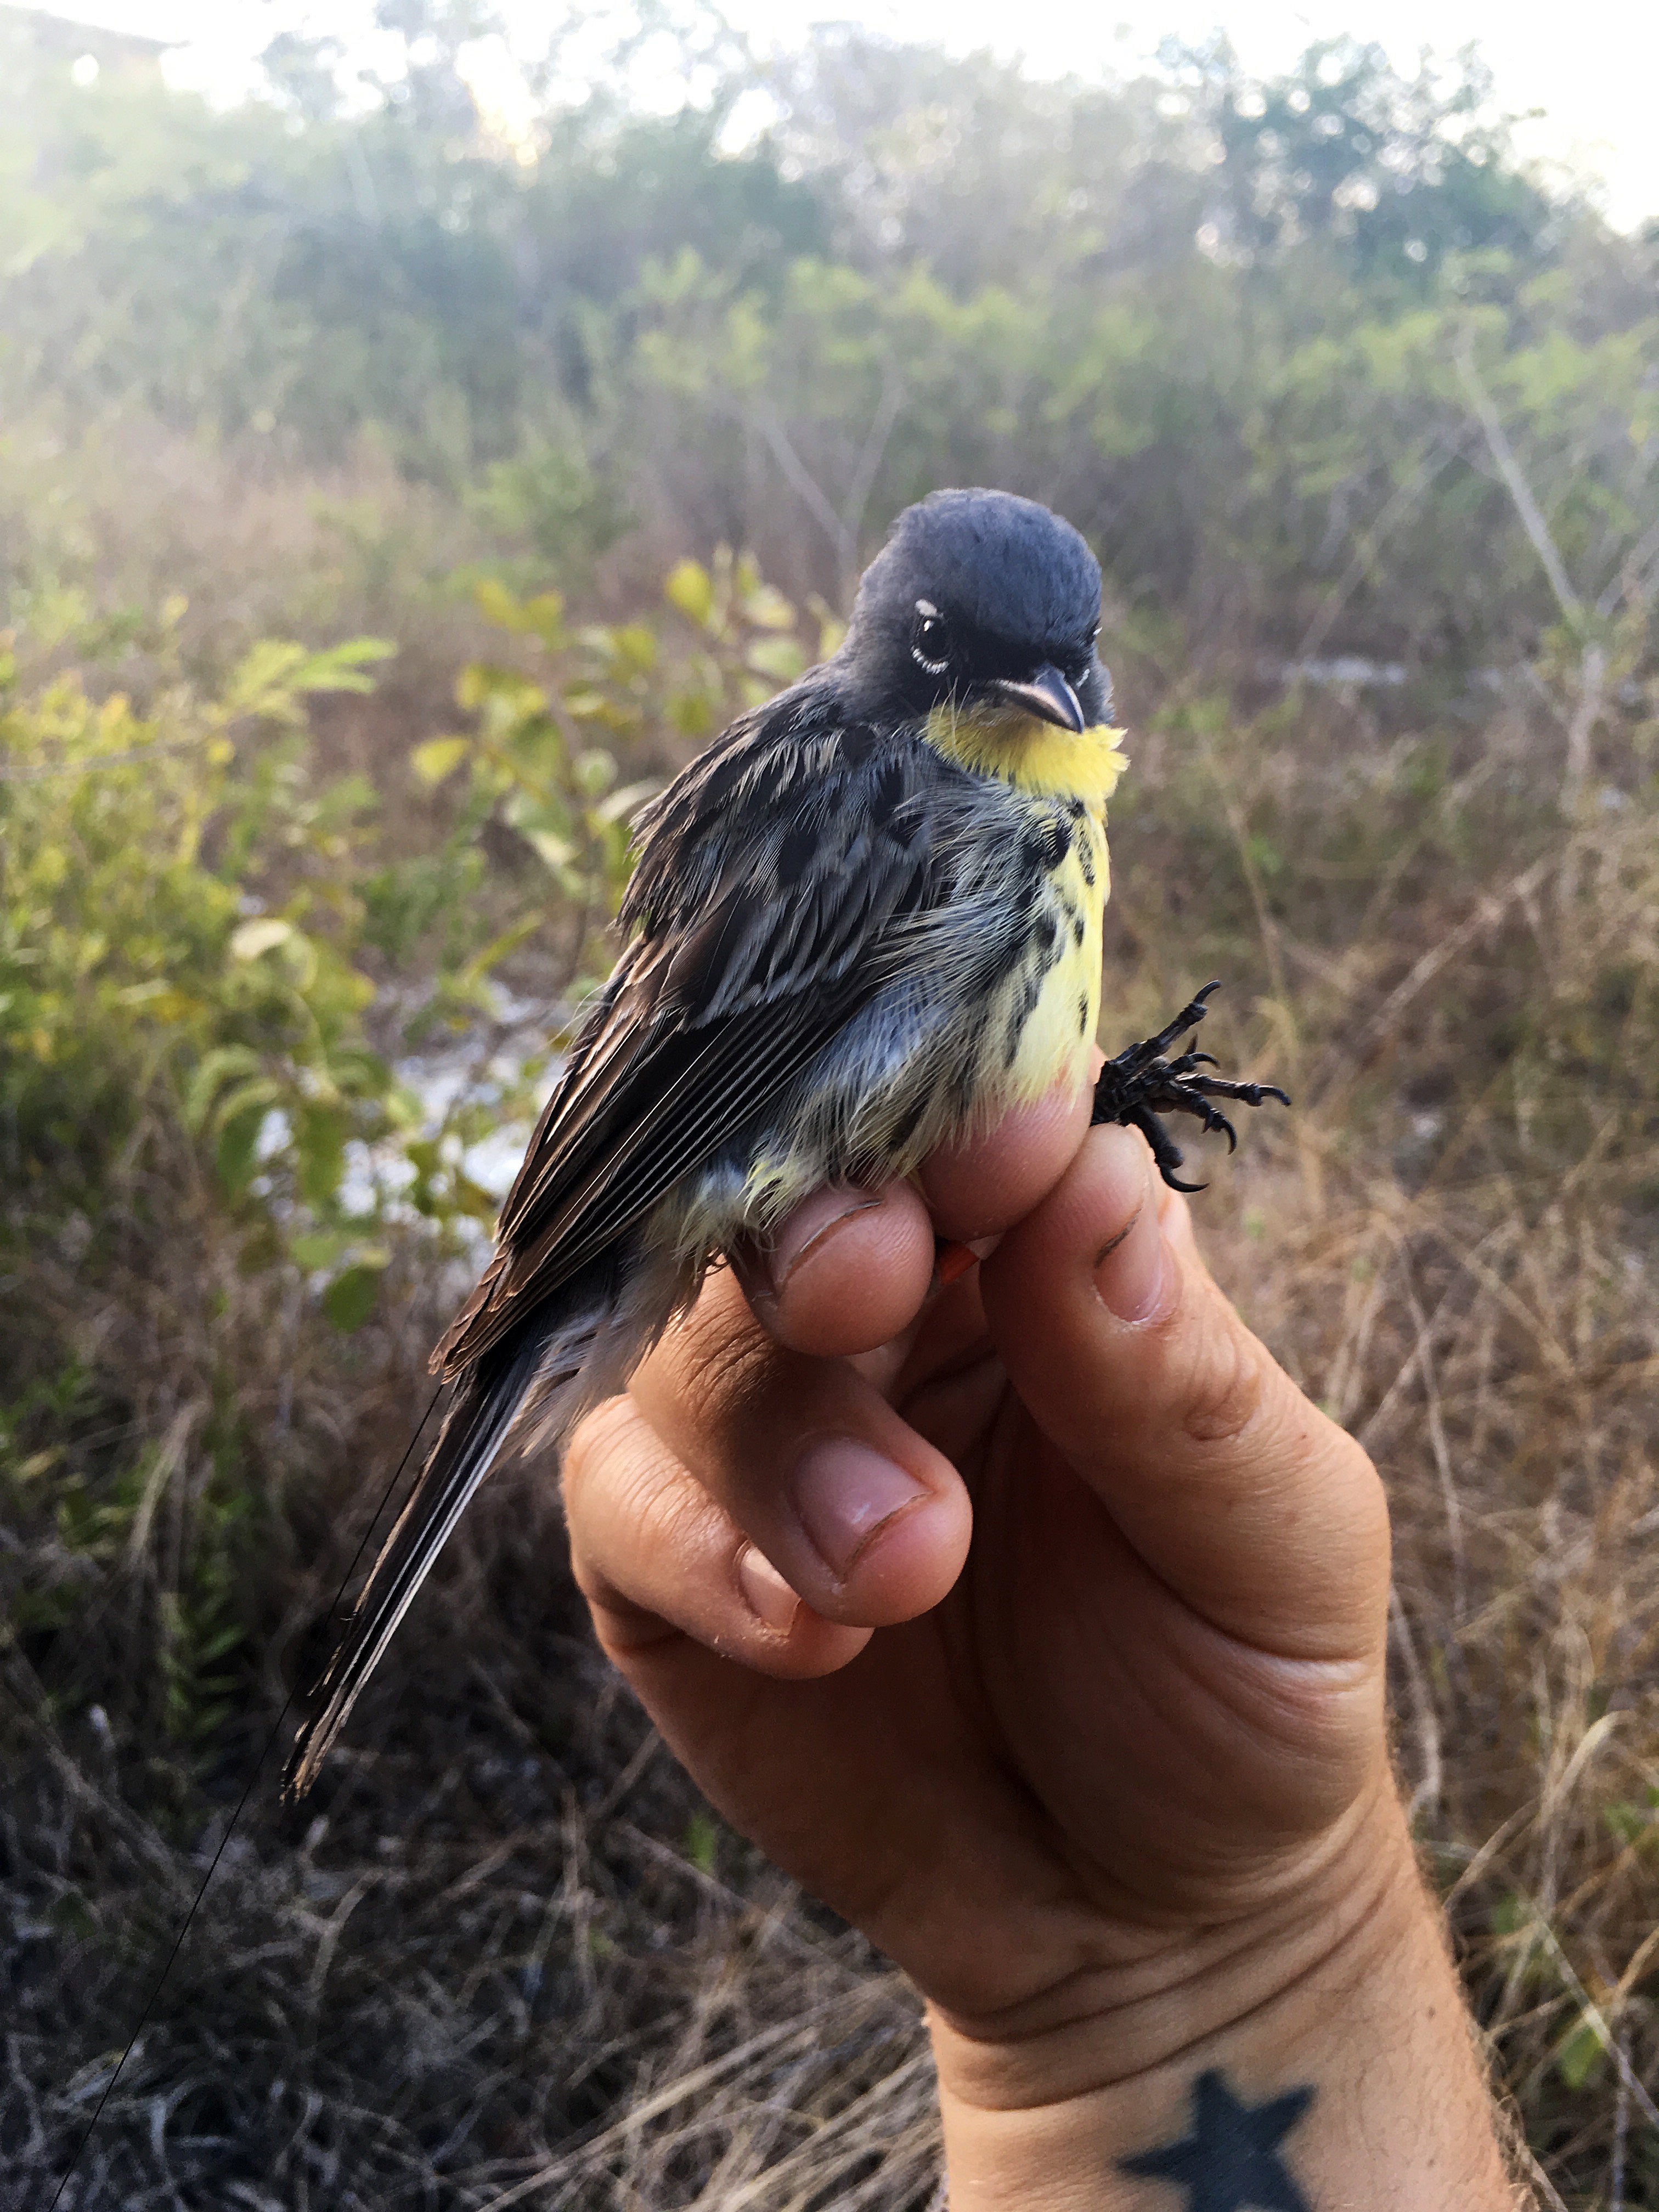 A male Kirtland's warbler in someone's hand